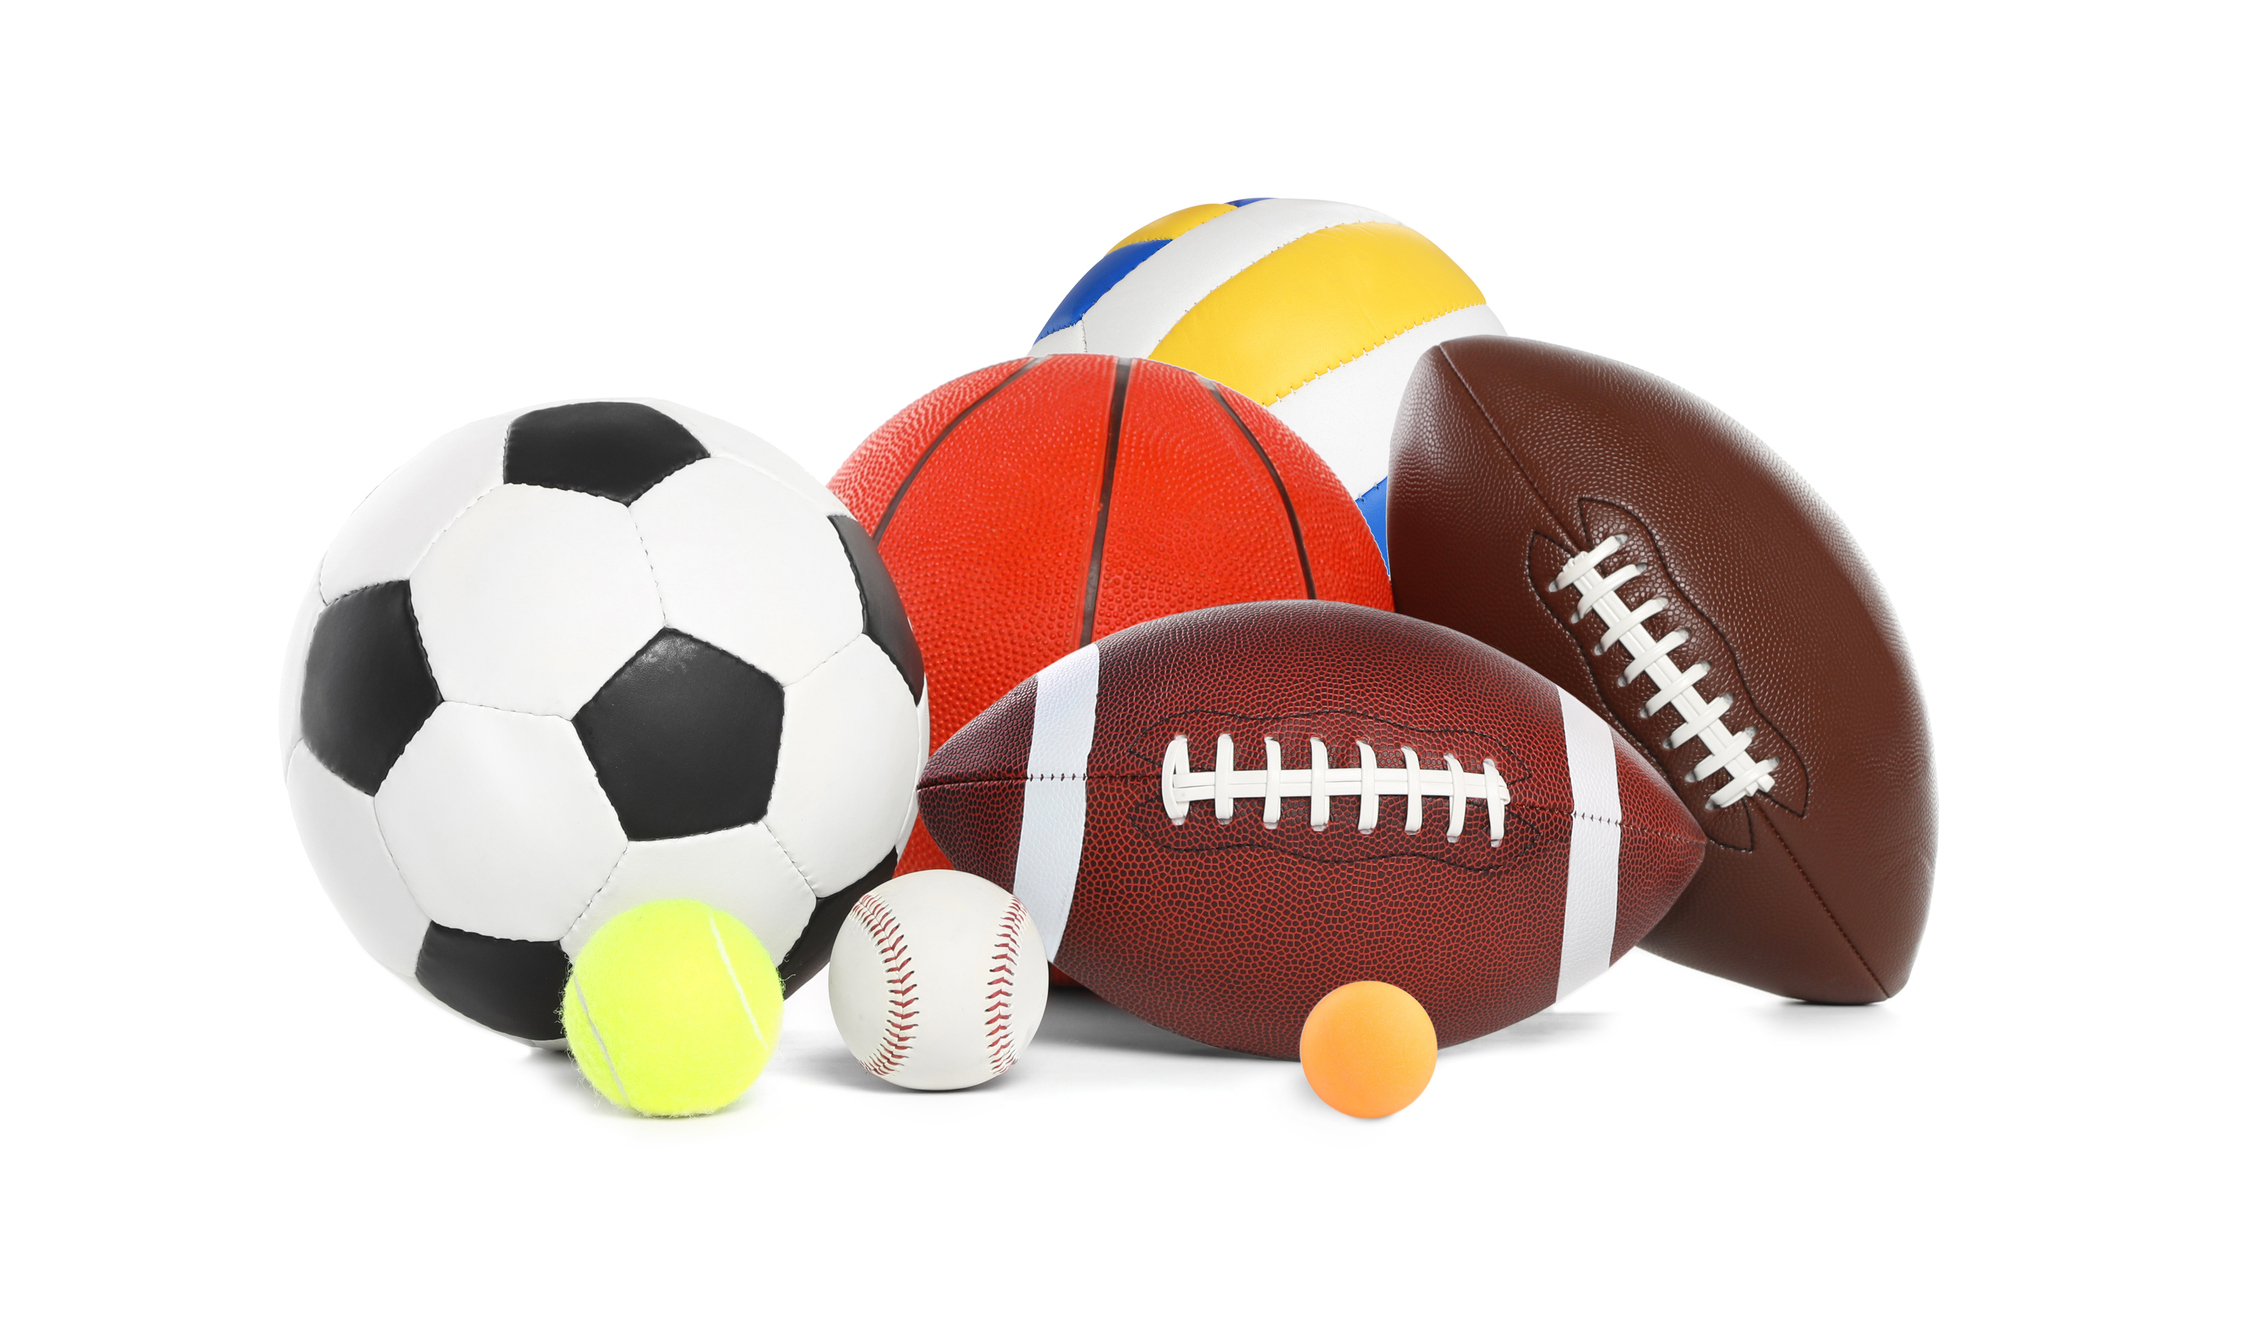 Wright Memorial Hospital Provides Complimentary Sports Physicals